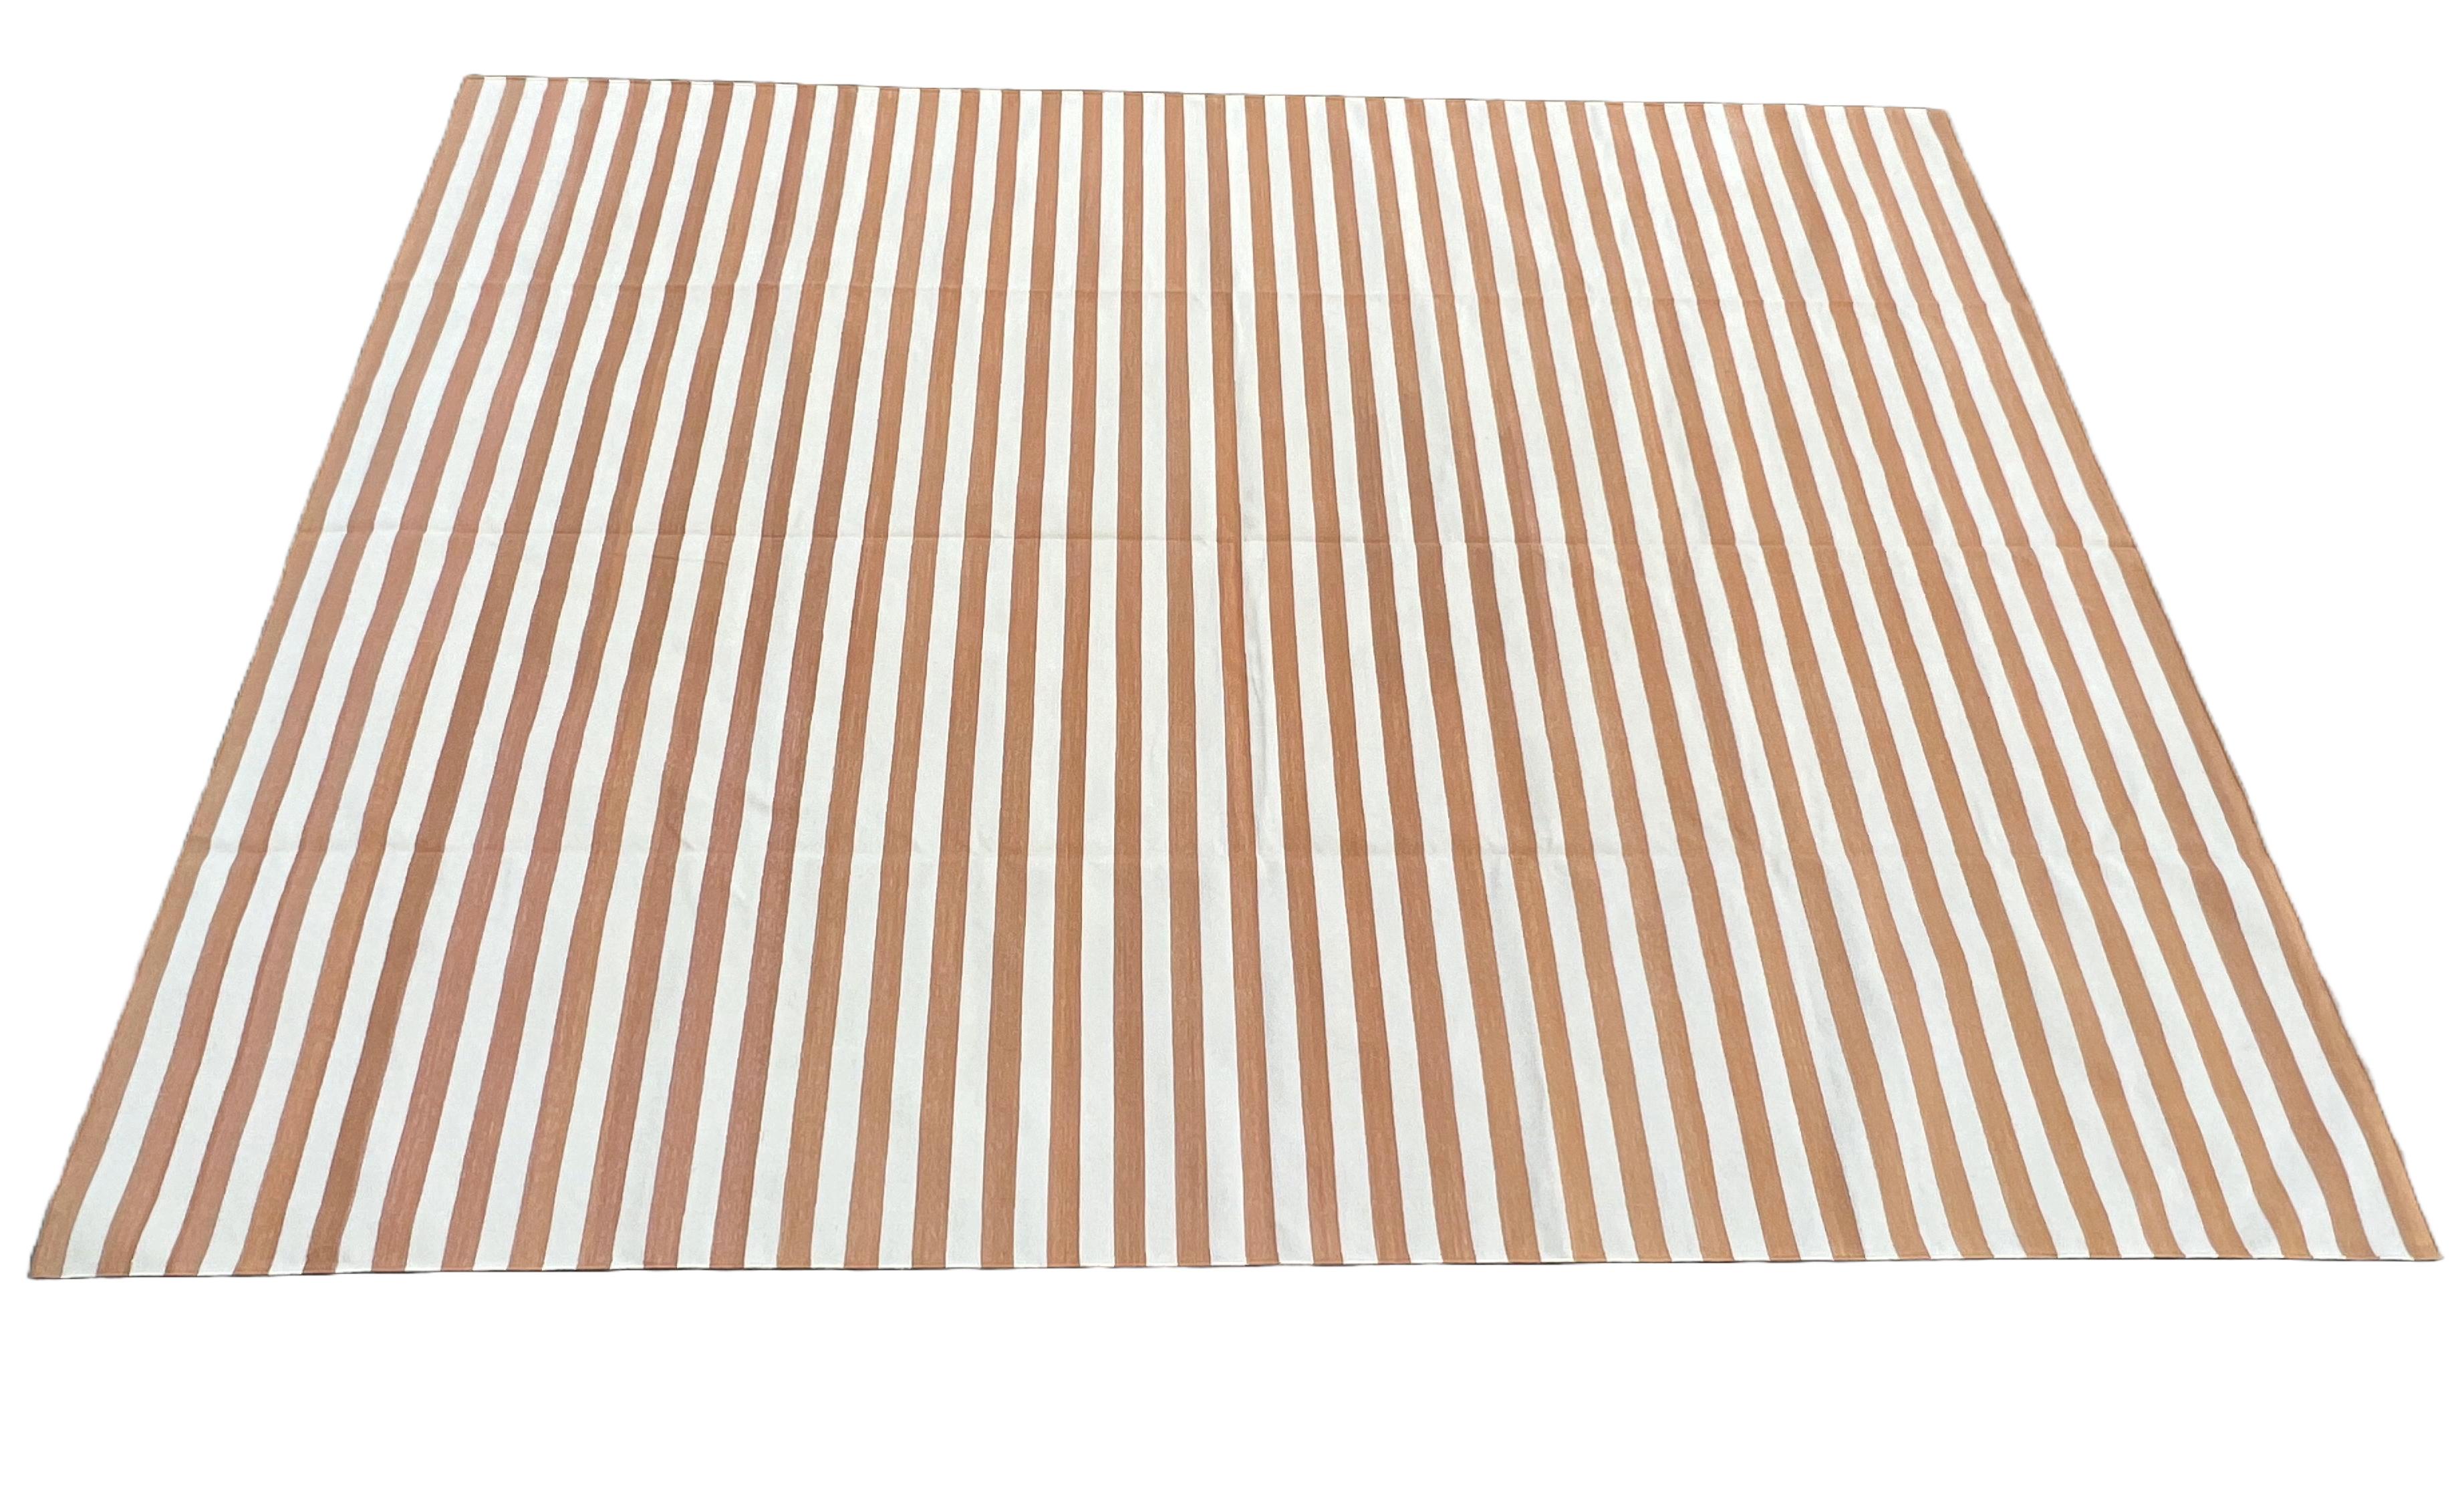 Handmade Cotton Area Flat Weave Rug, 9x12 Tan And White Striped Indian Dhurrie For Sale 4